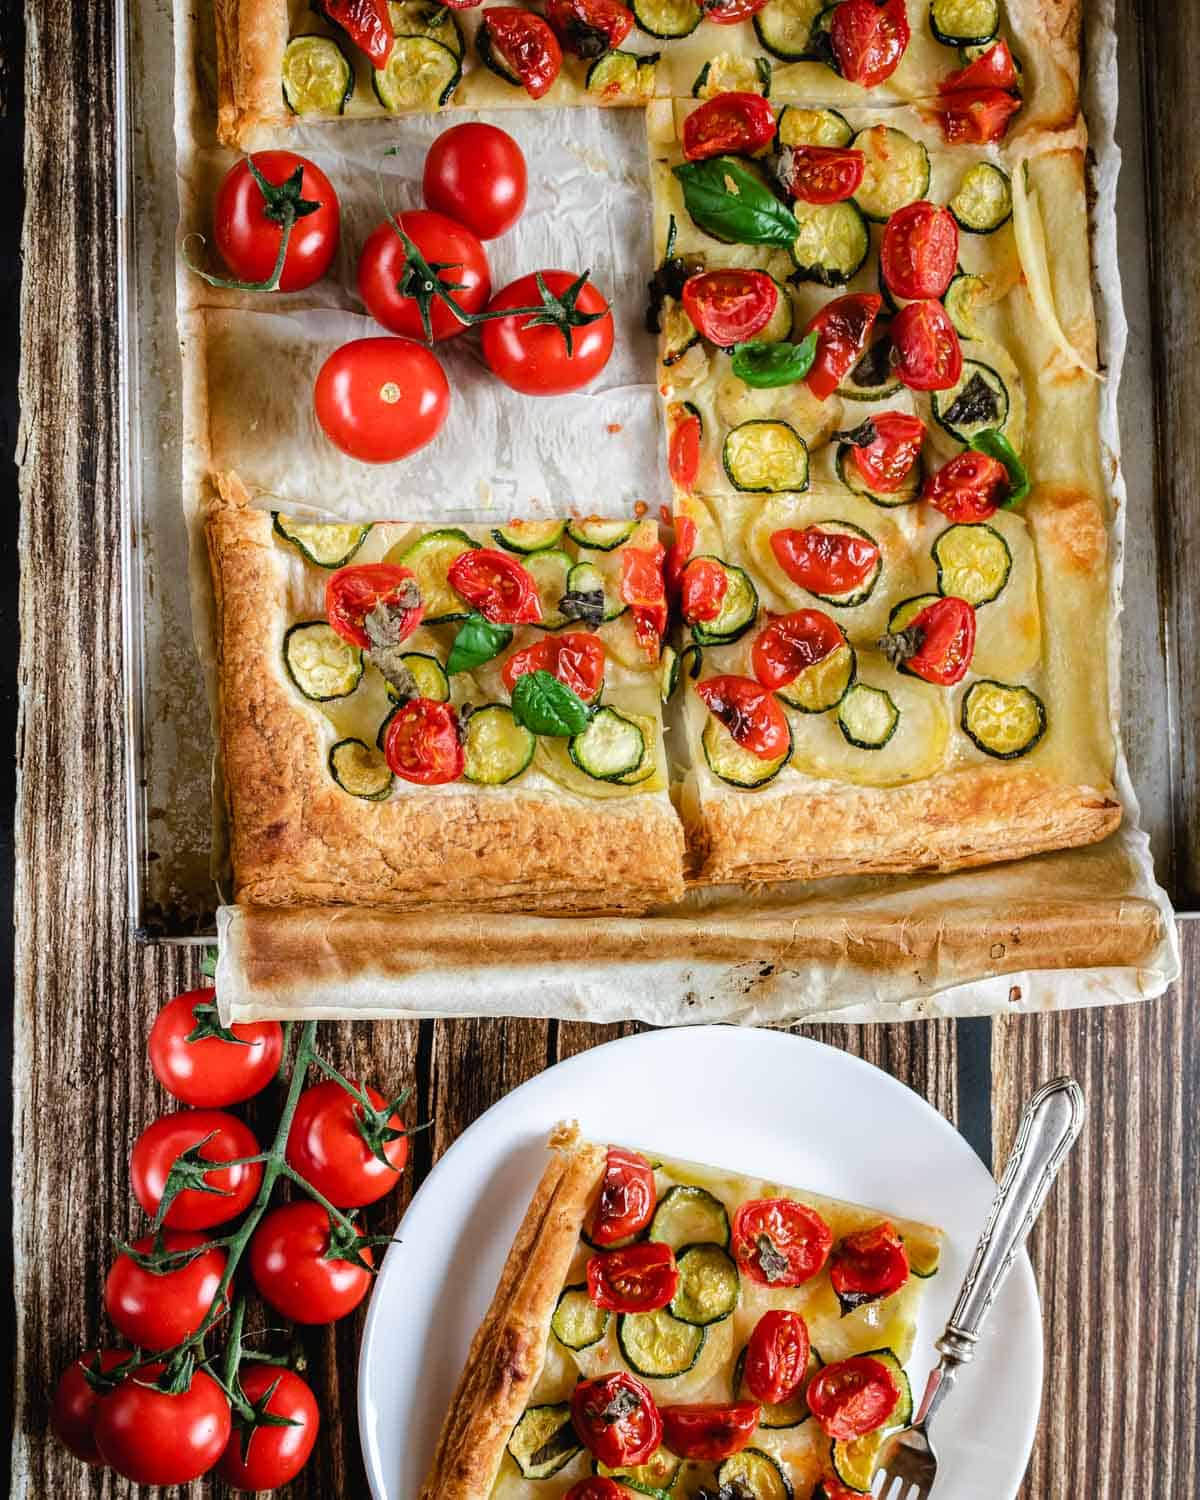 A view from above of a Zucchini Tart and a slice in a white plate with a fork on a wooden surface. The slice shown zucchini, potatoes and cherry tomatoes baked on top.